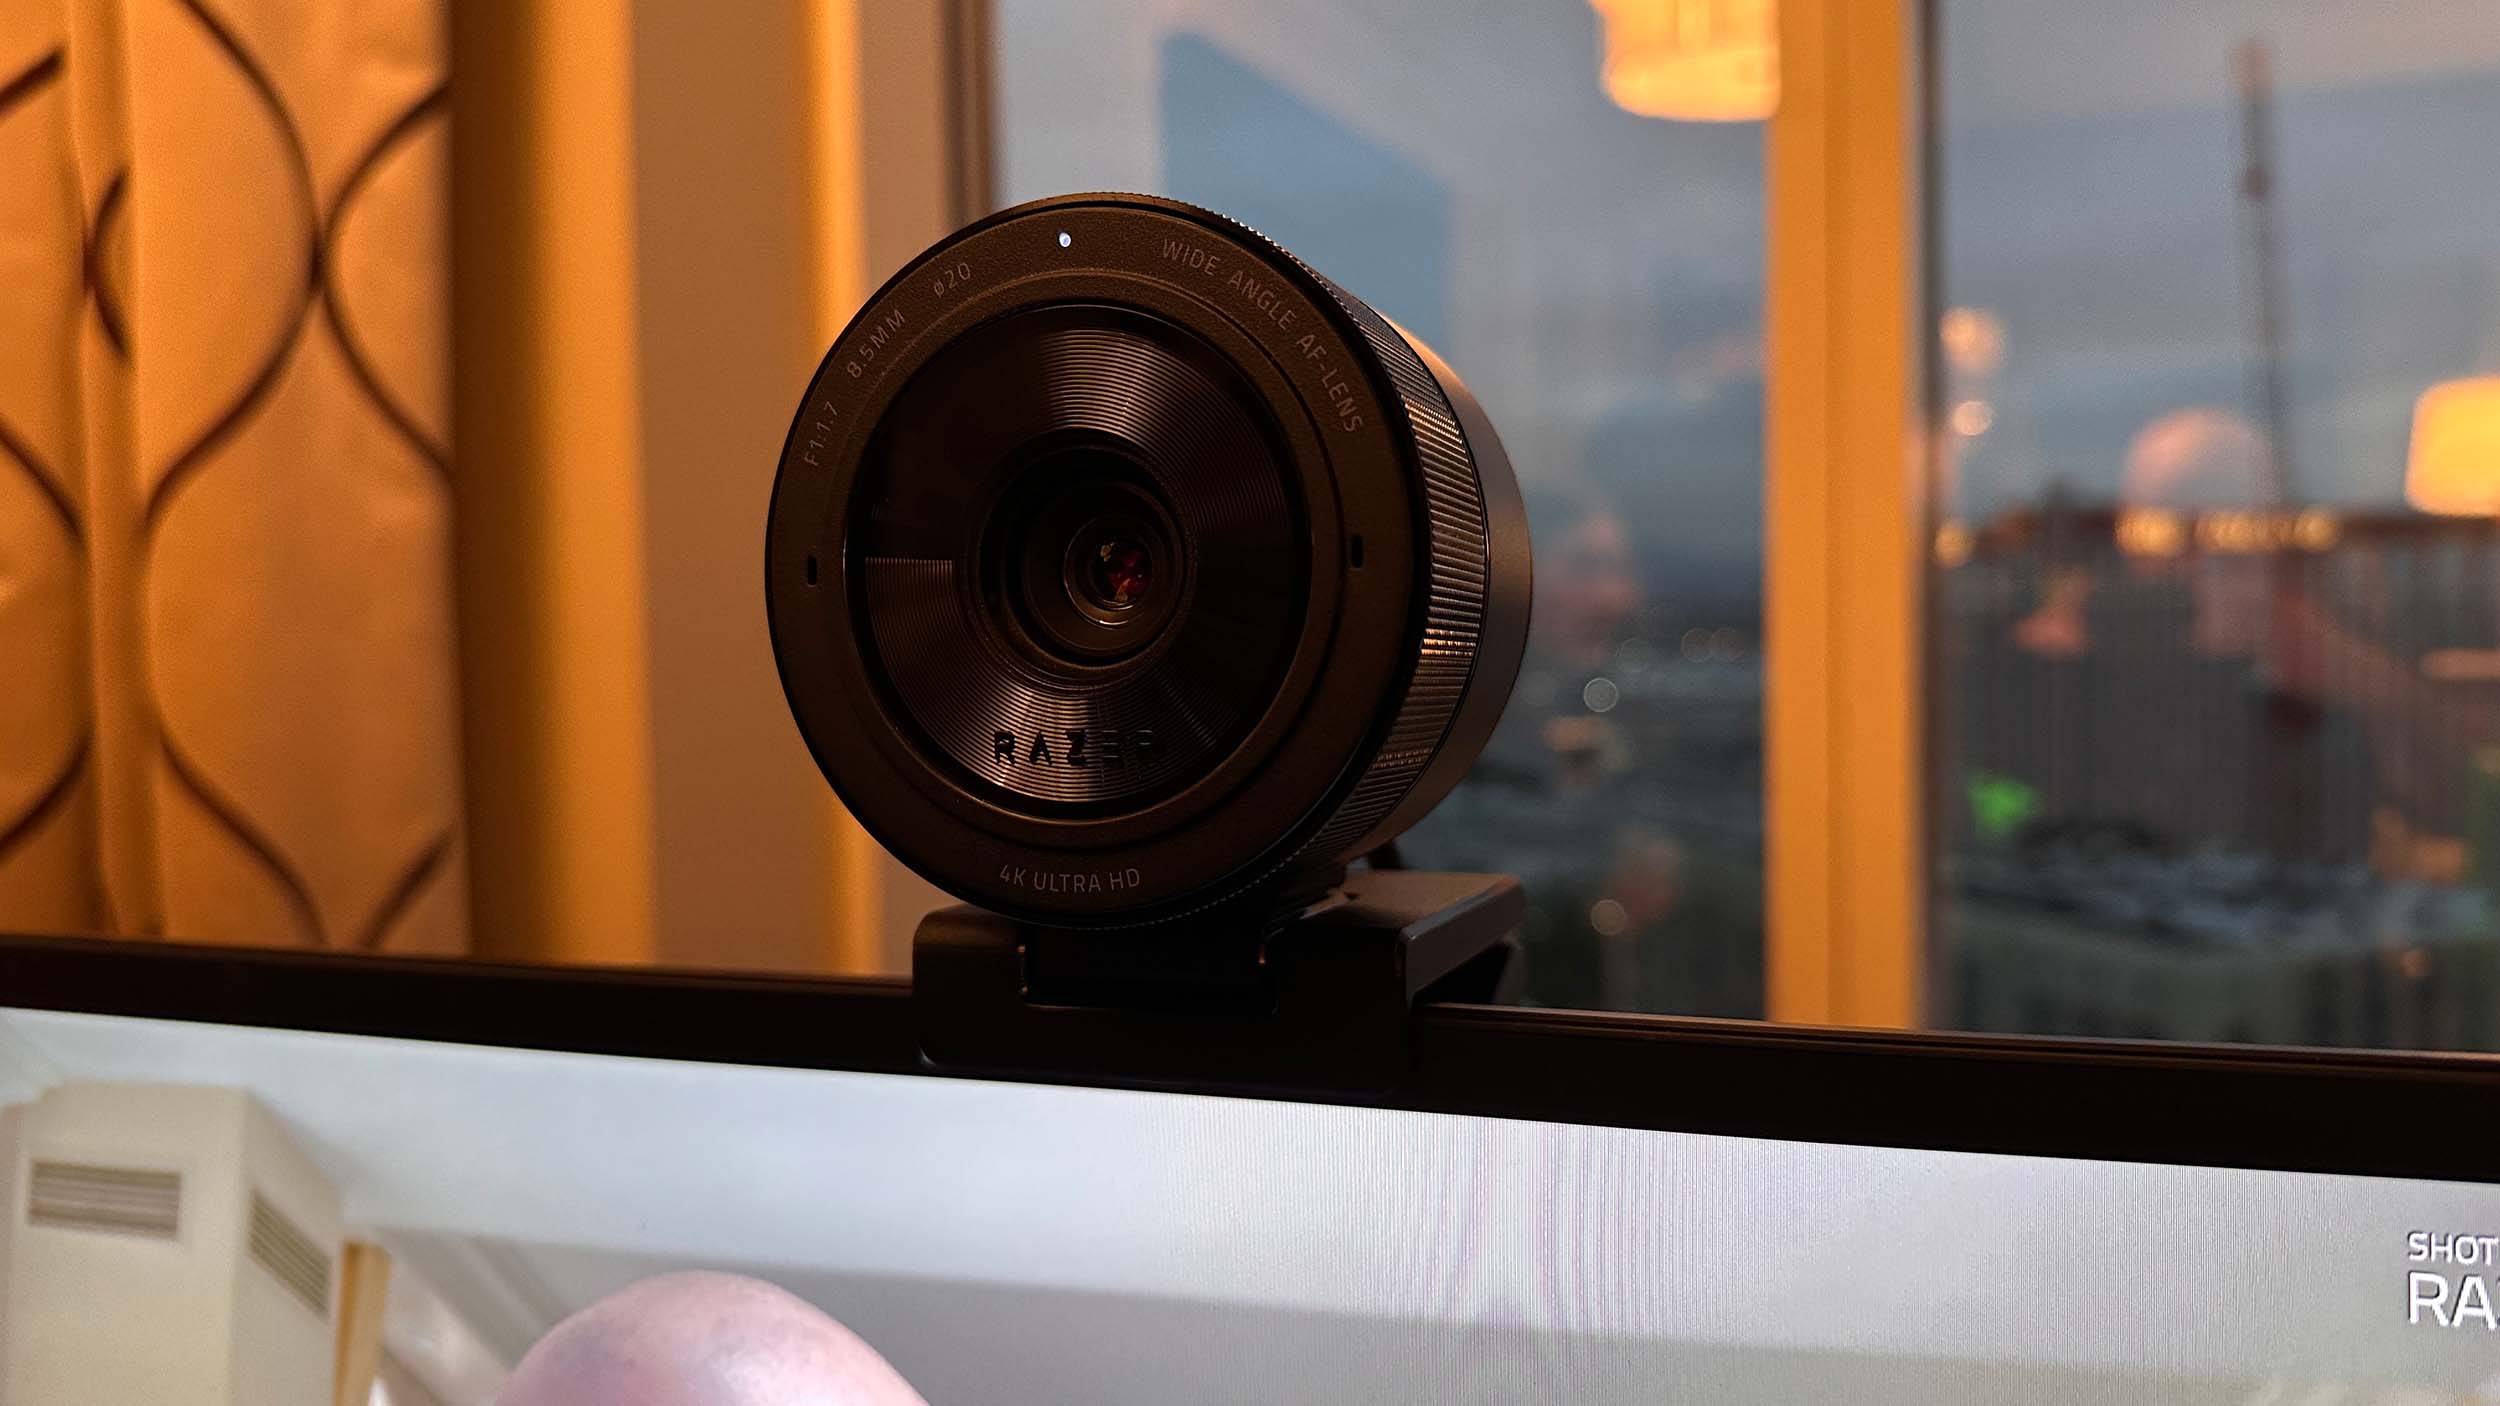 Razer Kiyo Pro review: A worthy webcam for conference calls and